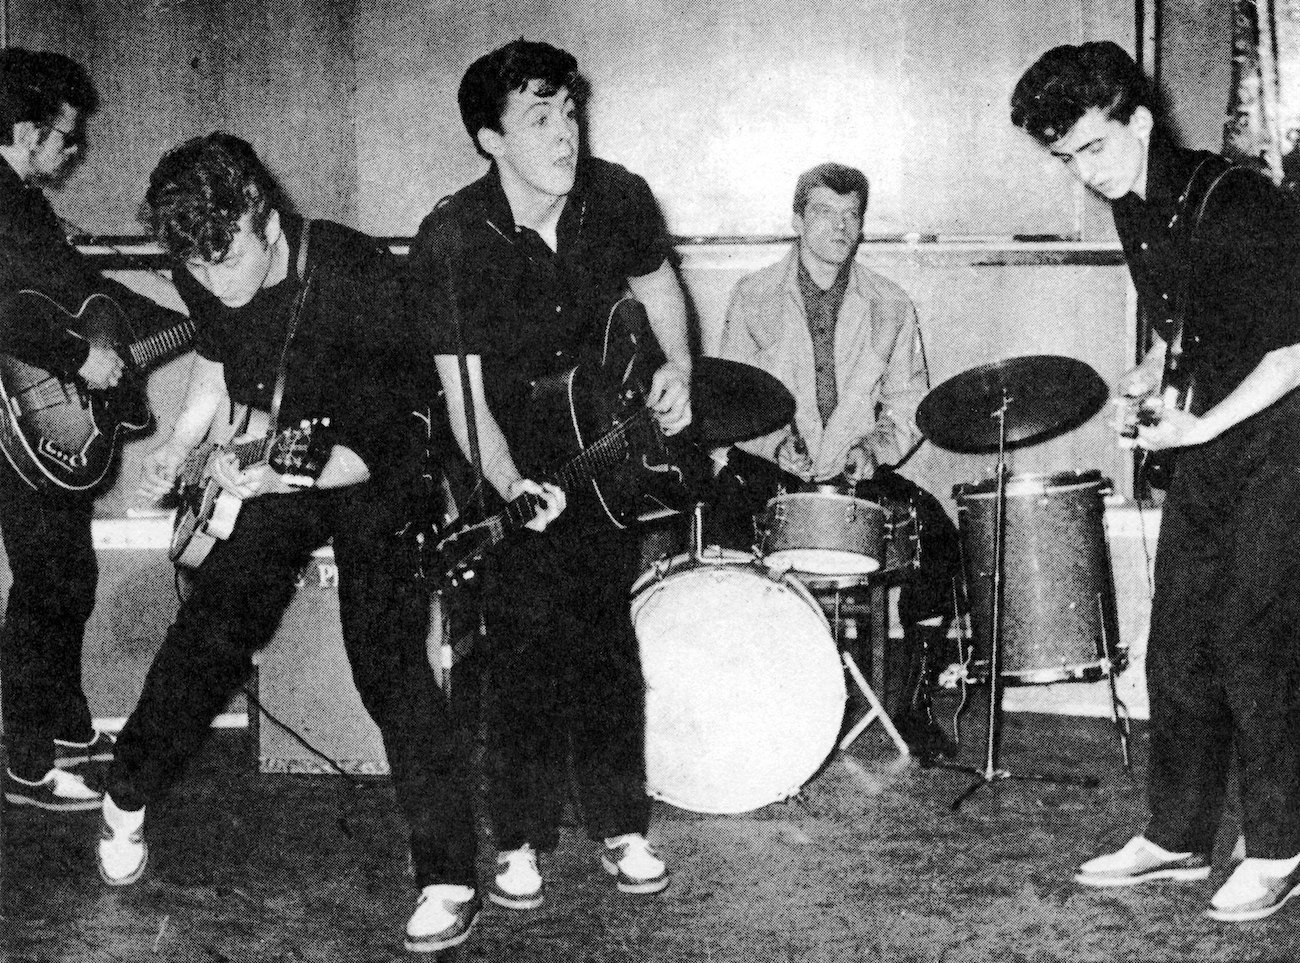 The Beatles performing in their early days, 1960.